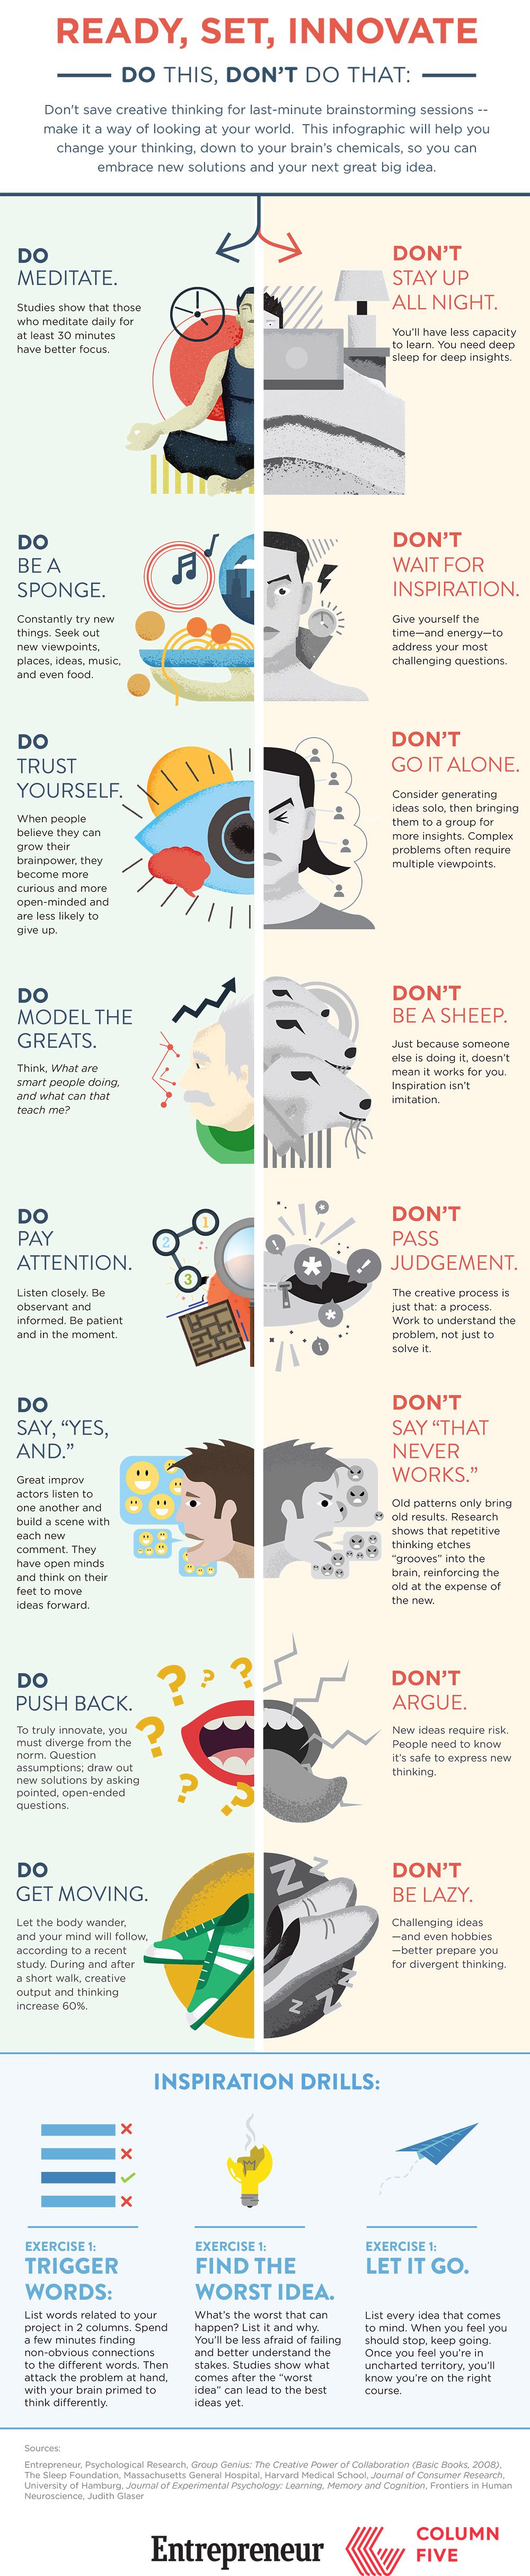 How You're Killing Your Own Creativity (Infographic)